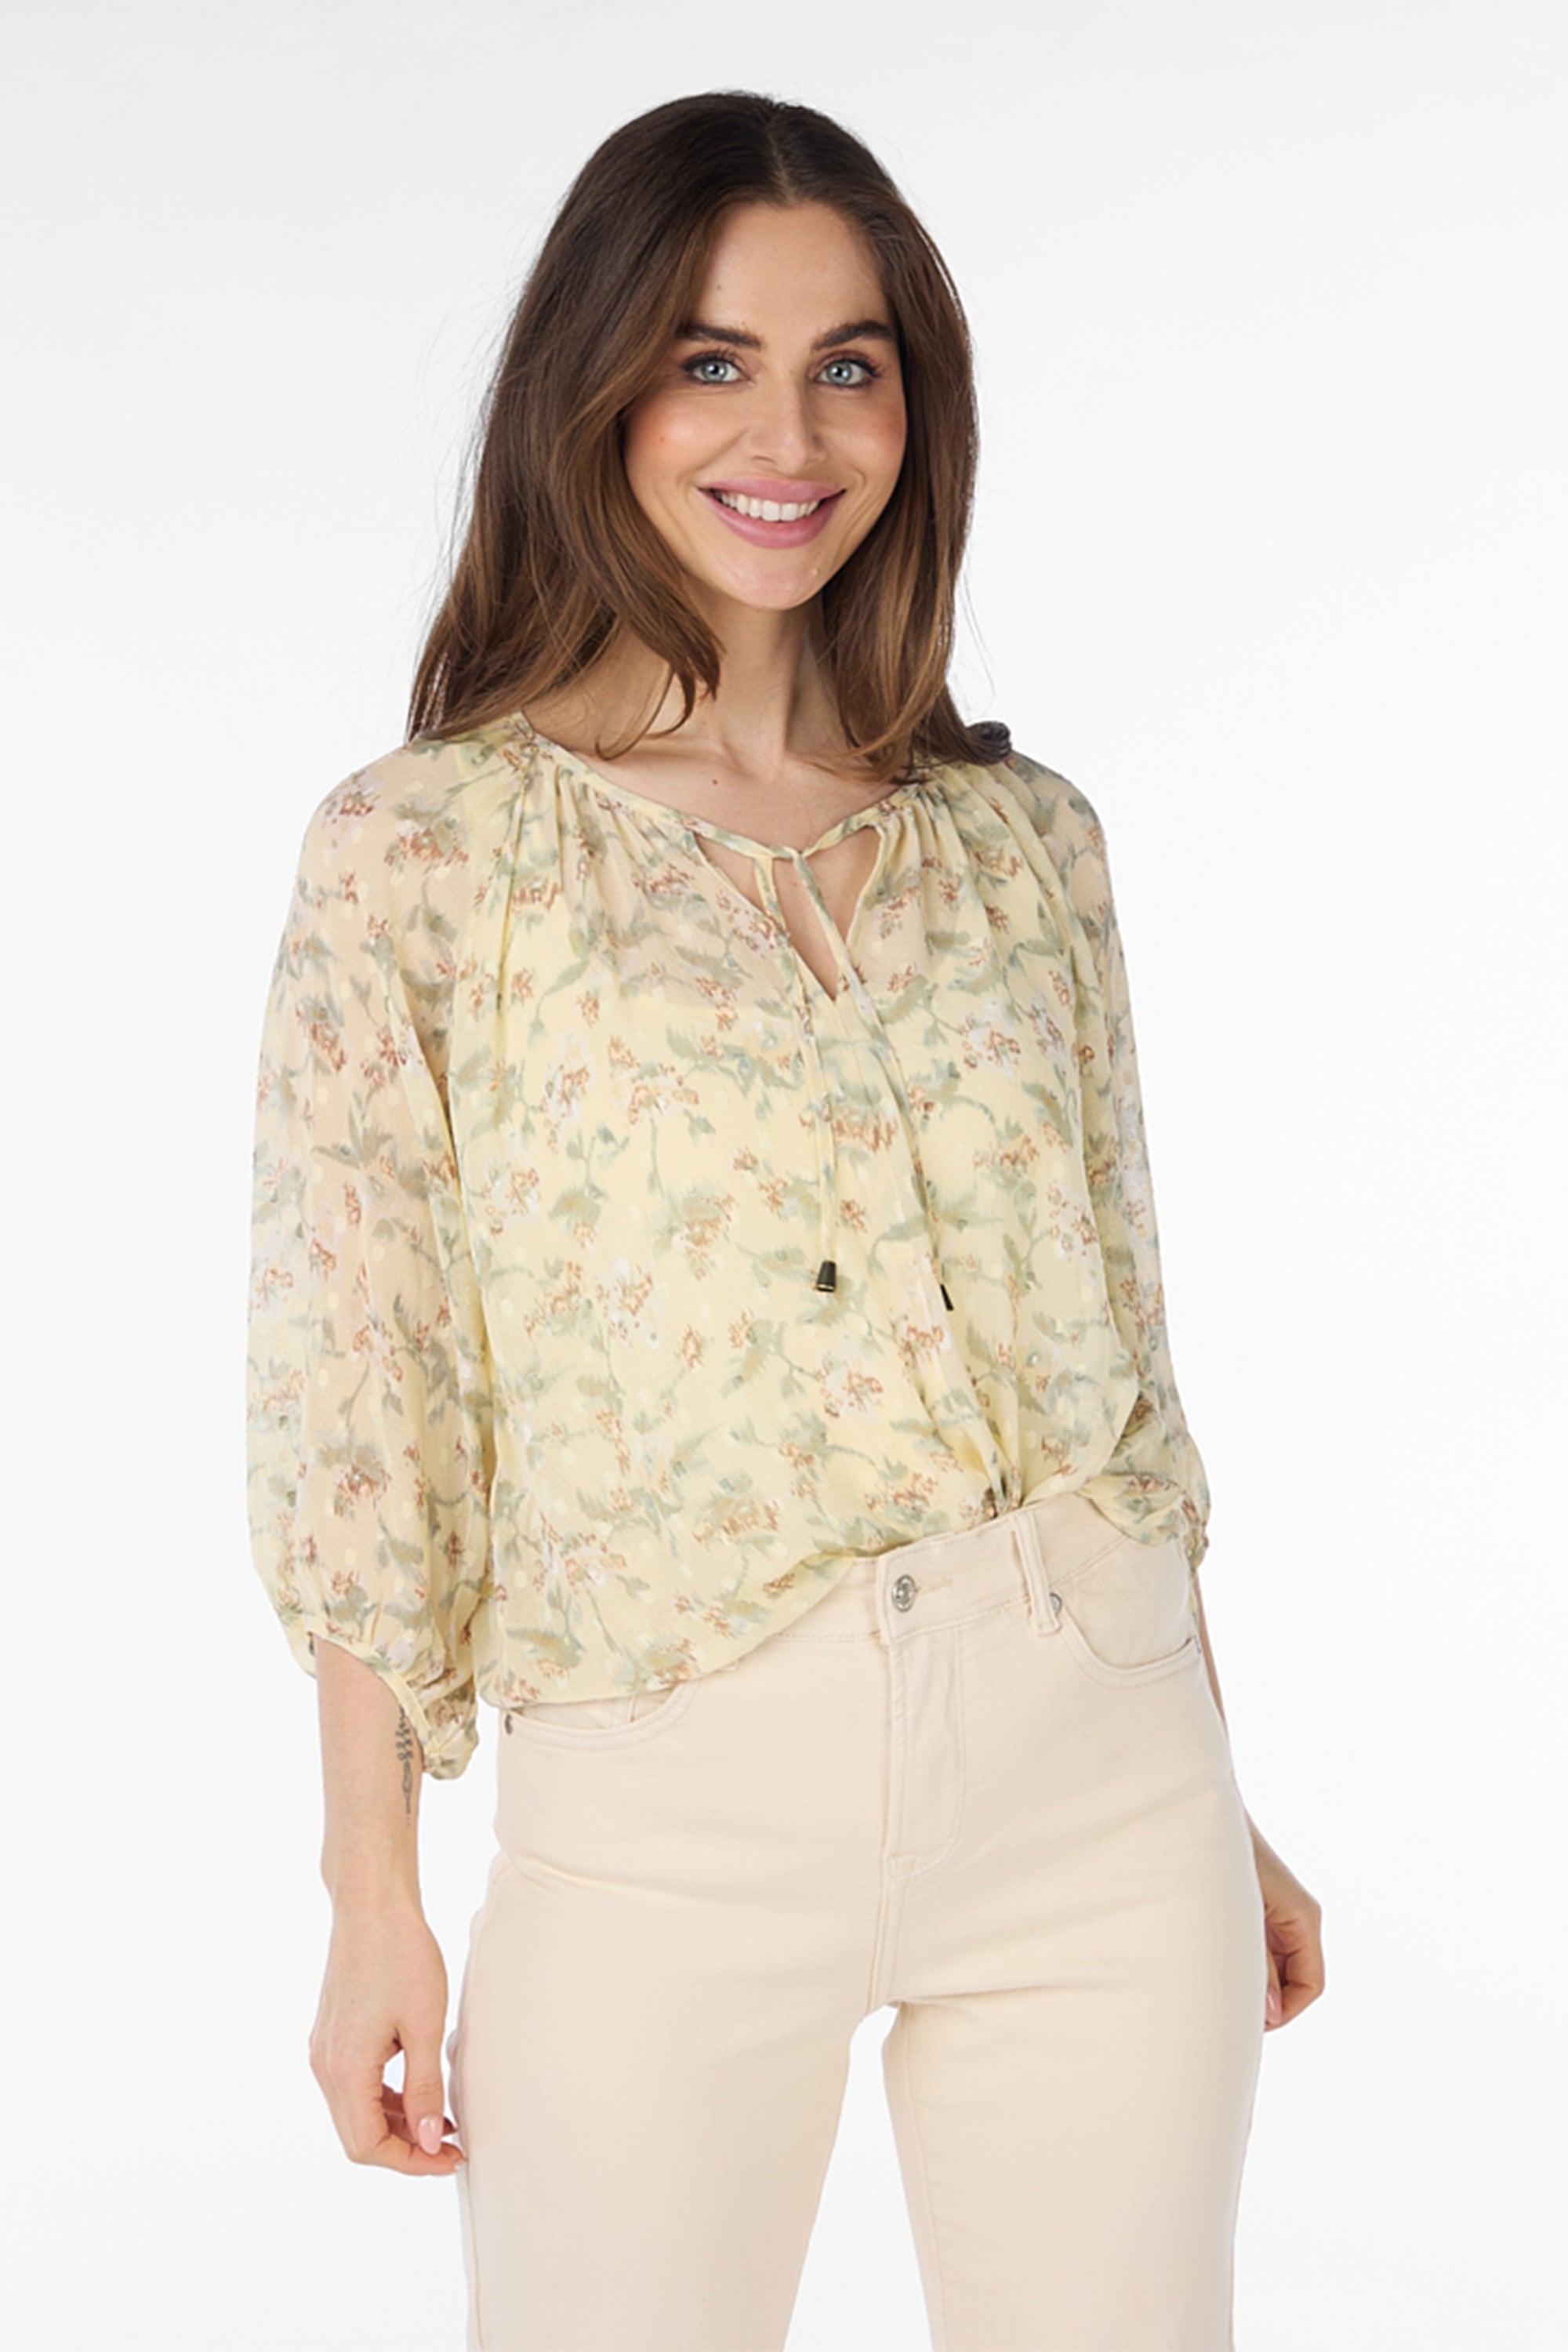 Front view of Esqualo (SP2414042) Women's  3/4 Raglan Sleeve Floral Blouse with split v-neck in a cream floral print